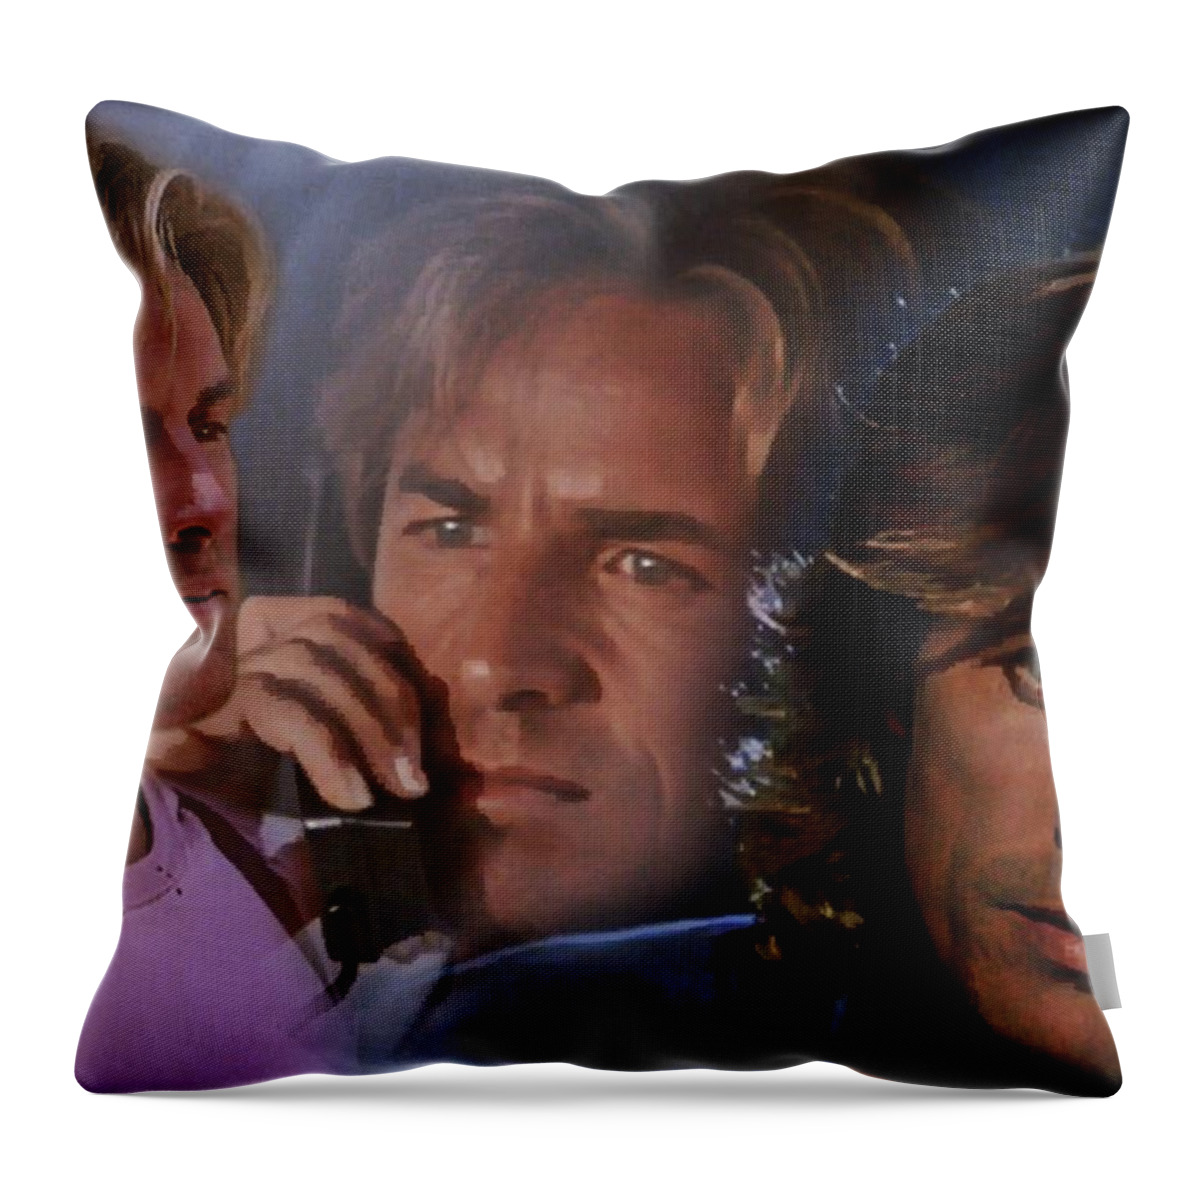 Miami Vice Throw Pillow featuring the digital art Over the Line 6 by Mark Baranowski